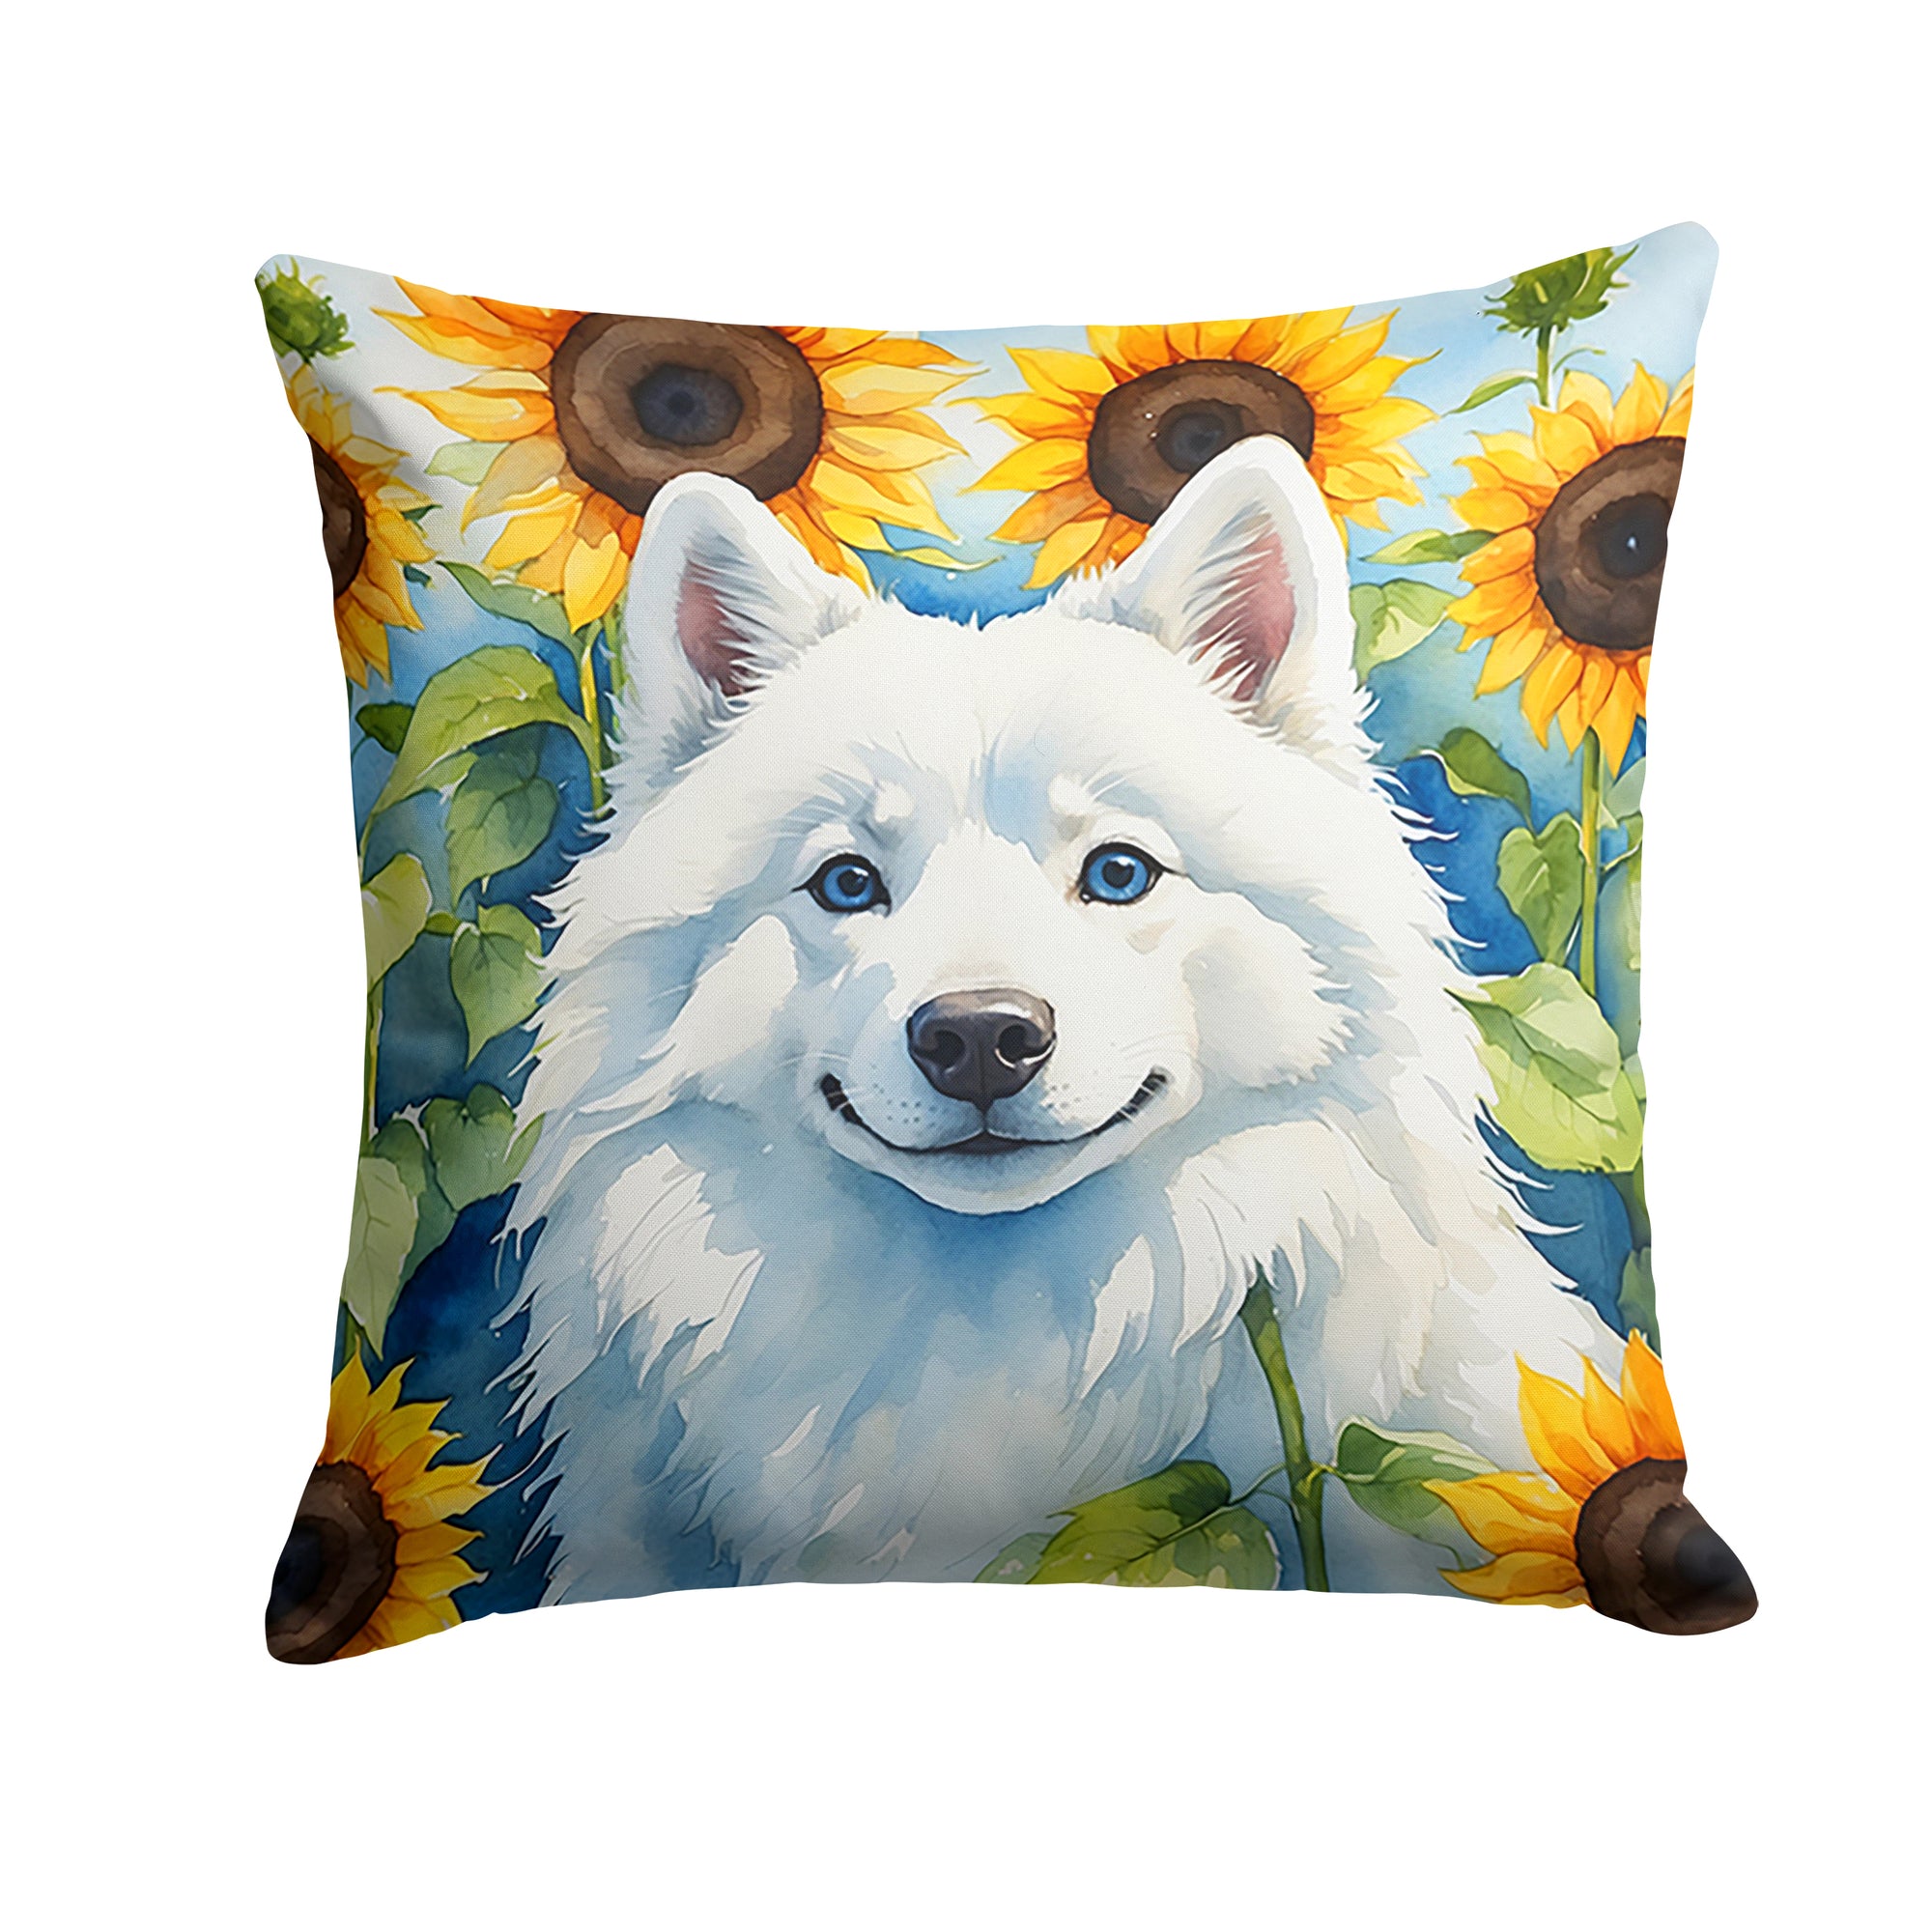 Buy this American Eskimo in Sunflowers Throw Pillow